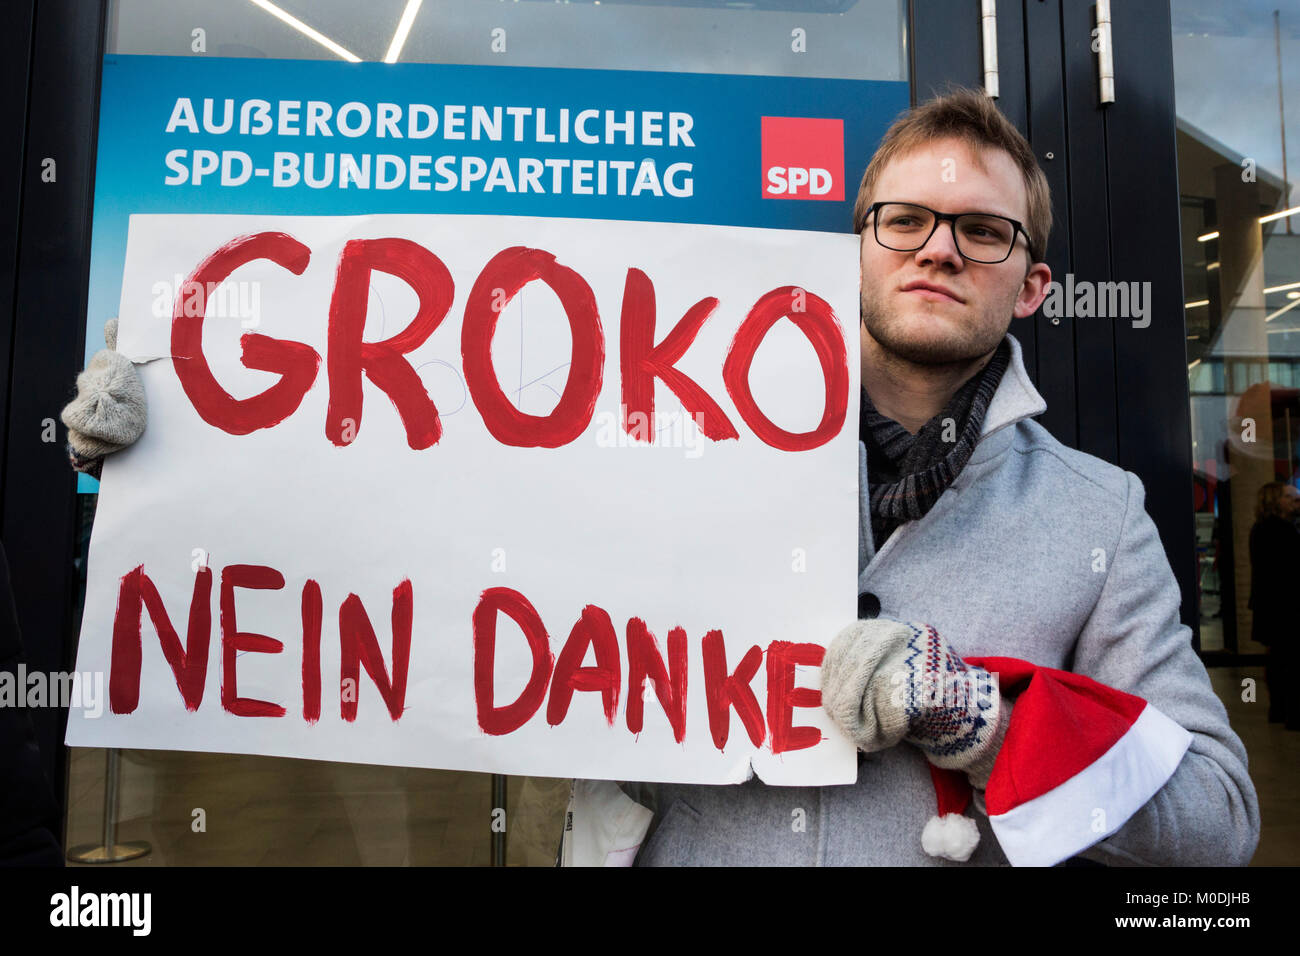 Bonn, Germany. 21 January 2018. Members of the SPD youth organisation Jusos (Young Socialists) protest against a grand coalition outside the event venue. Sign Groko No Thanks. SPD extraordinary party convention at World Conference Center Bonn to discuss and approve options to enter into a grand coalition with Angela Merkel's CDU, Christian Democrats, before asking SPD members for approval. Stock Photo